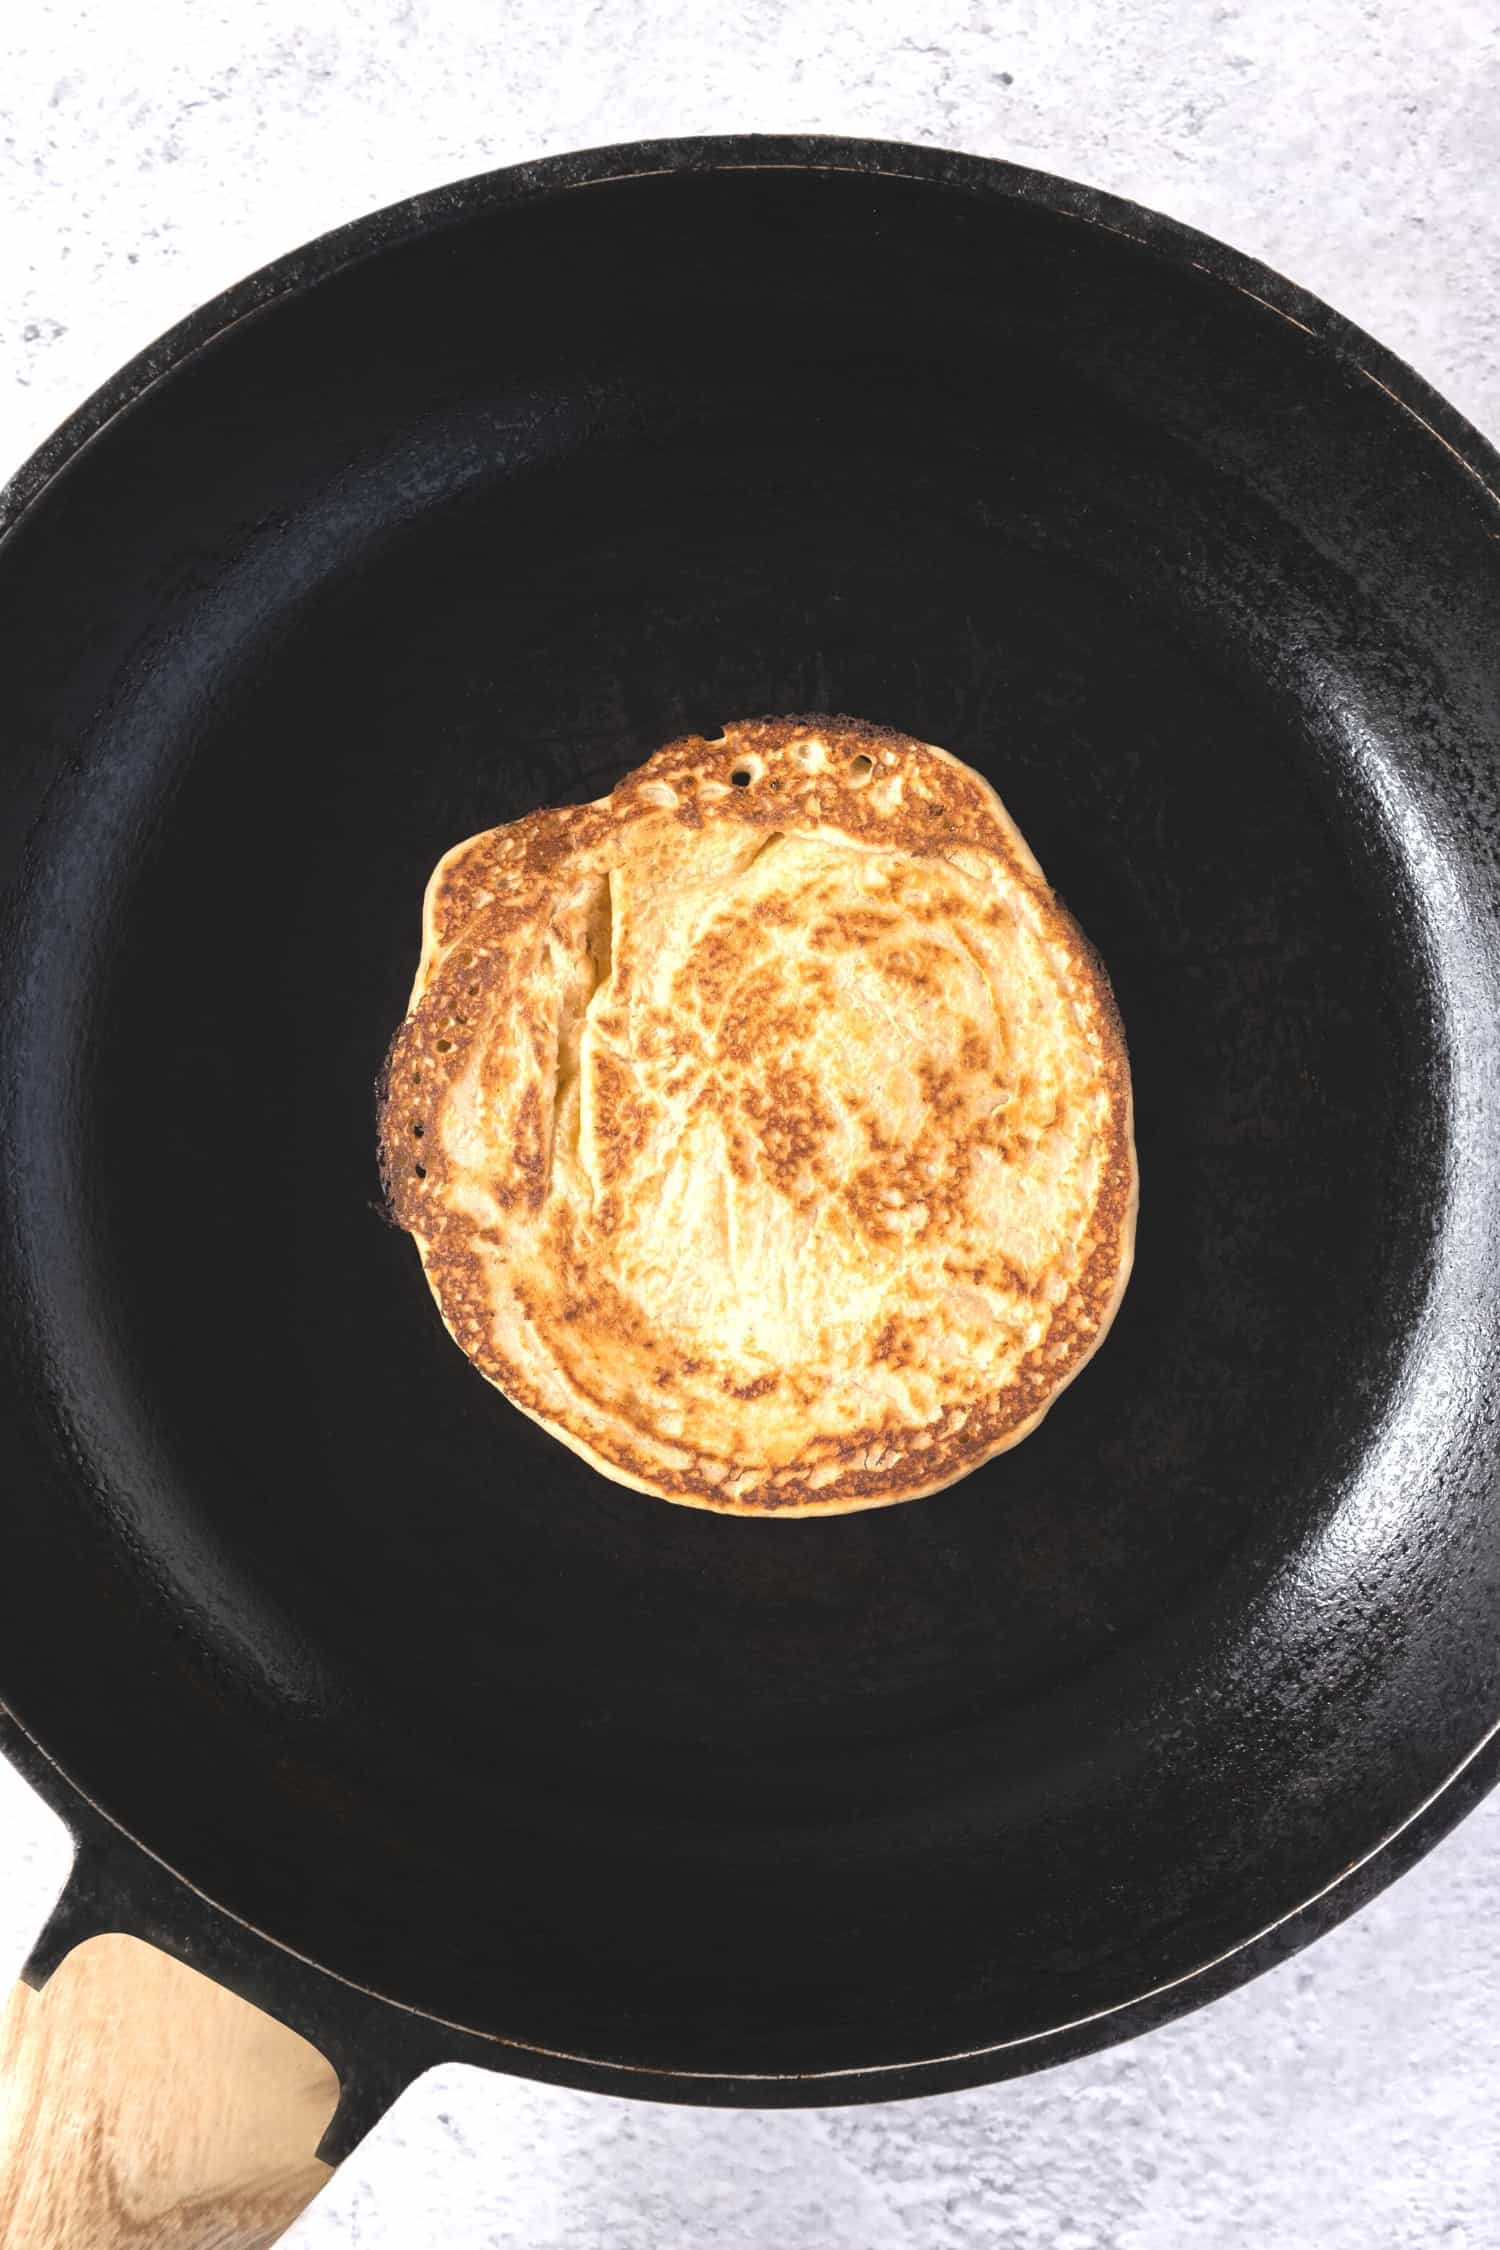 Cooking a pancake in a skillet.